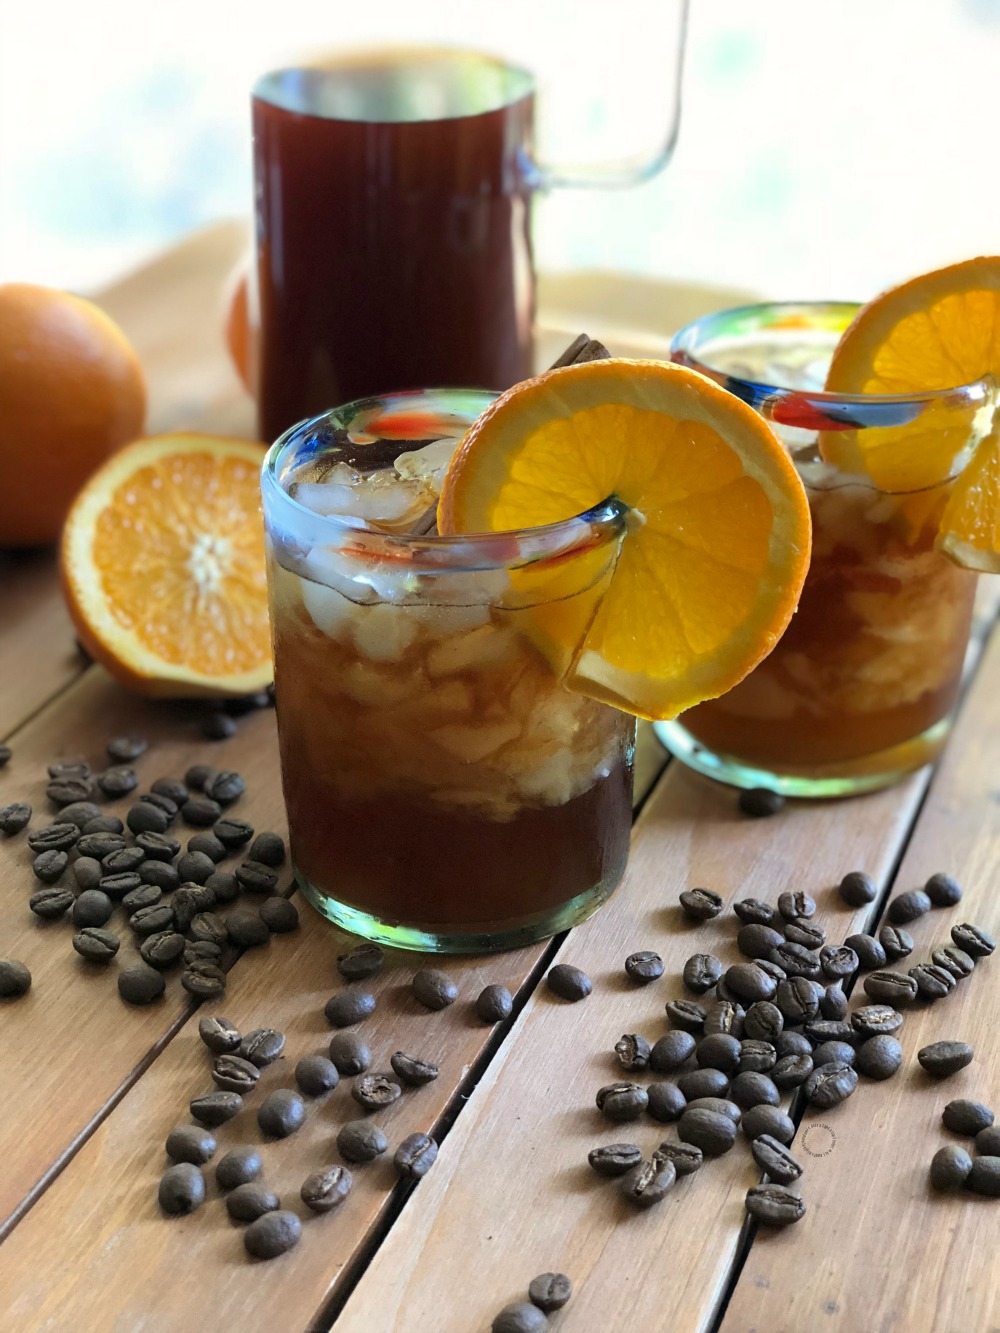 The Iced Coffee Mexican Style is a perfect pick me up